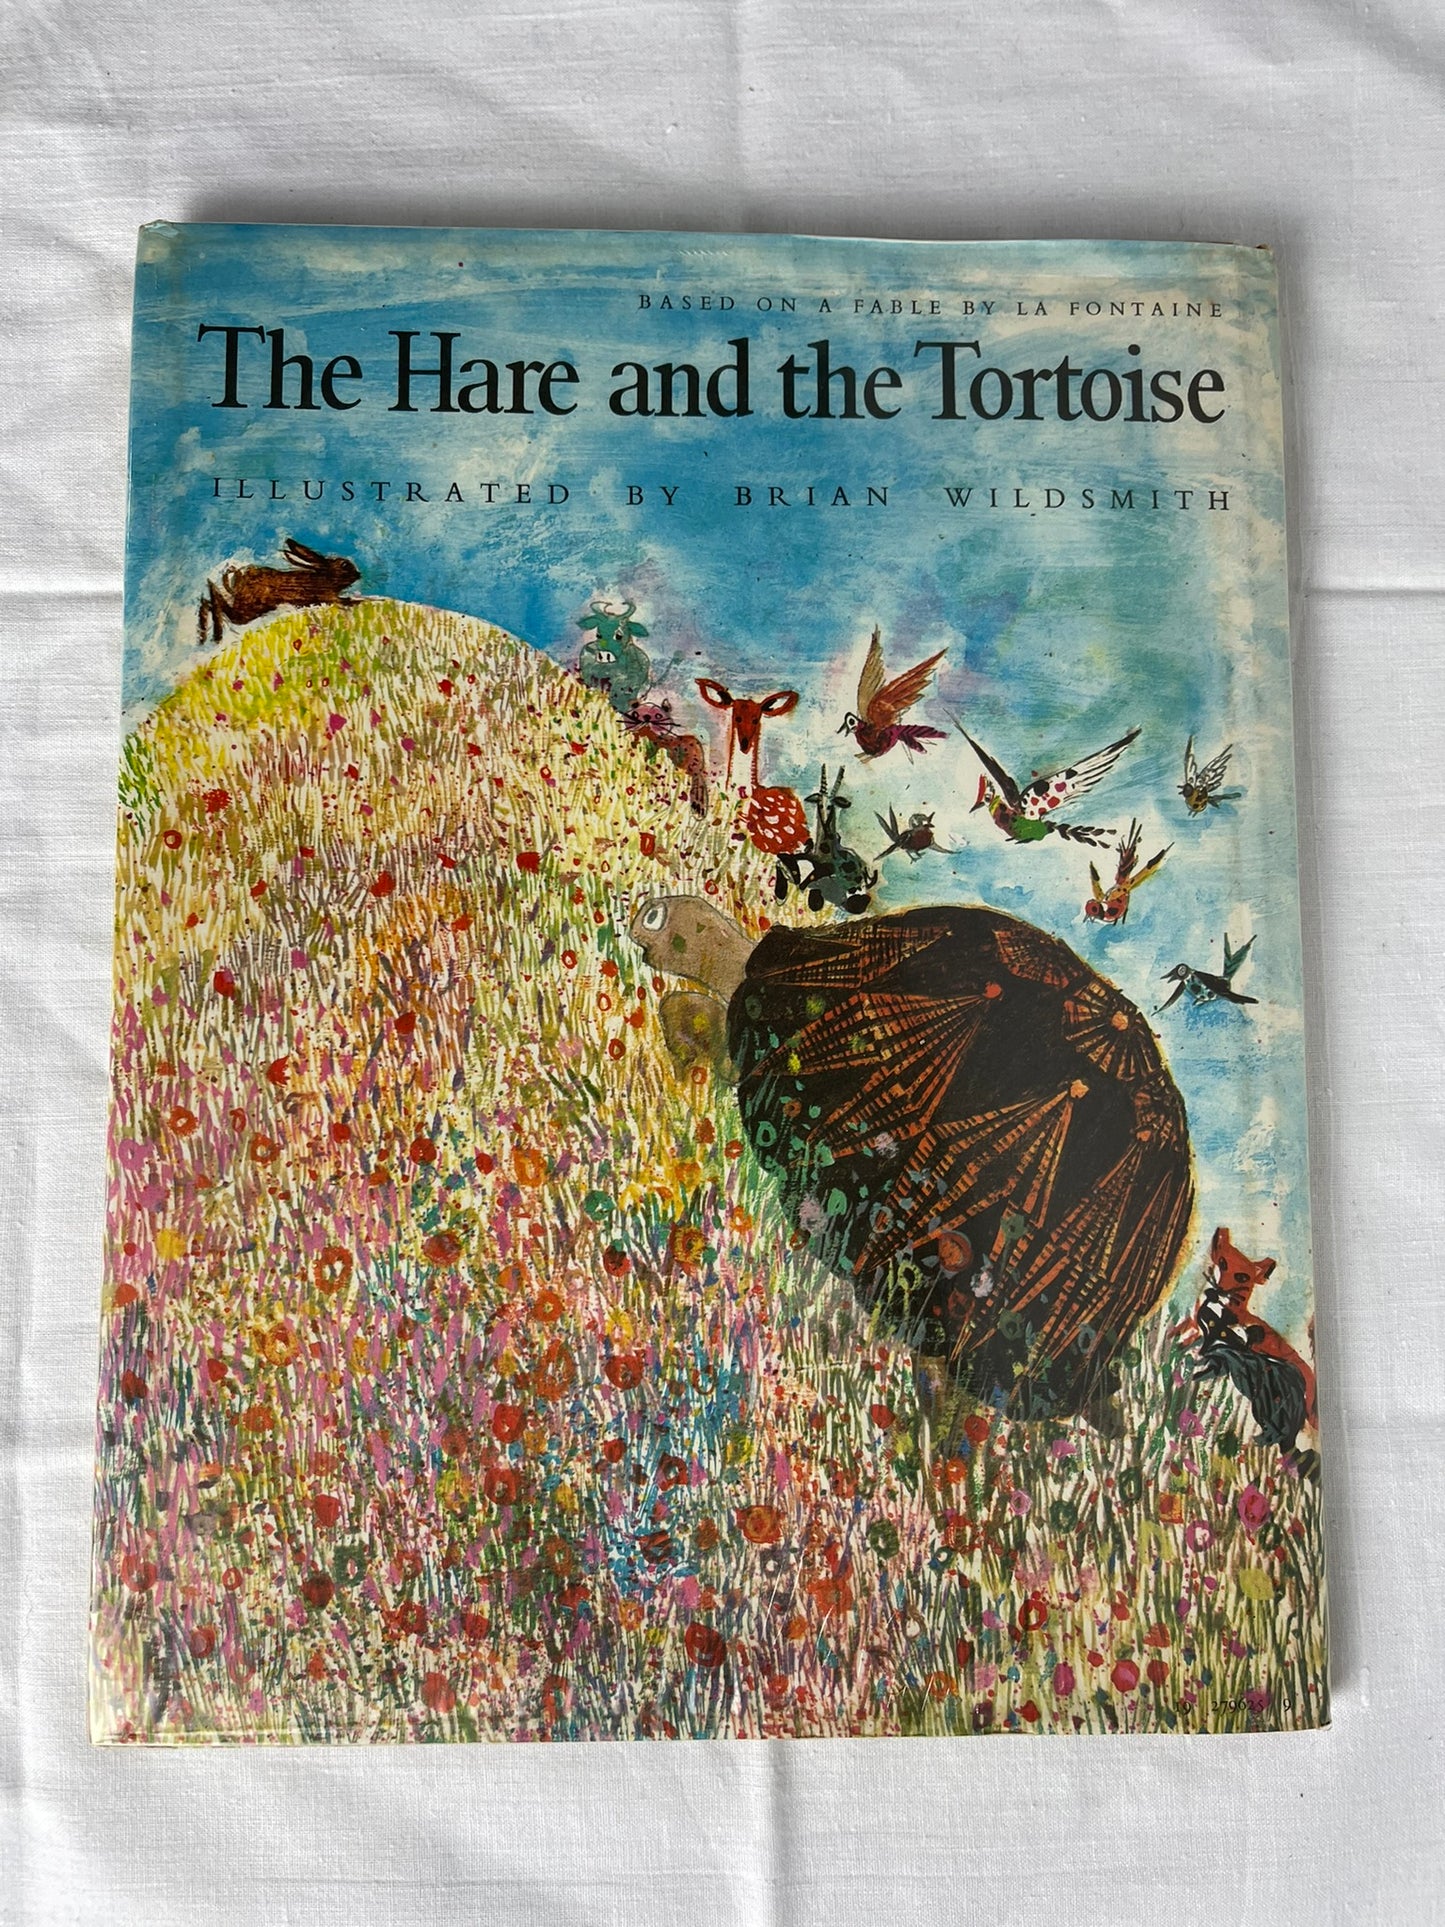 The Hare And The Tortoise by Brian Wildsmith